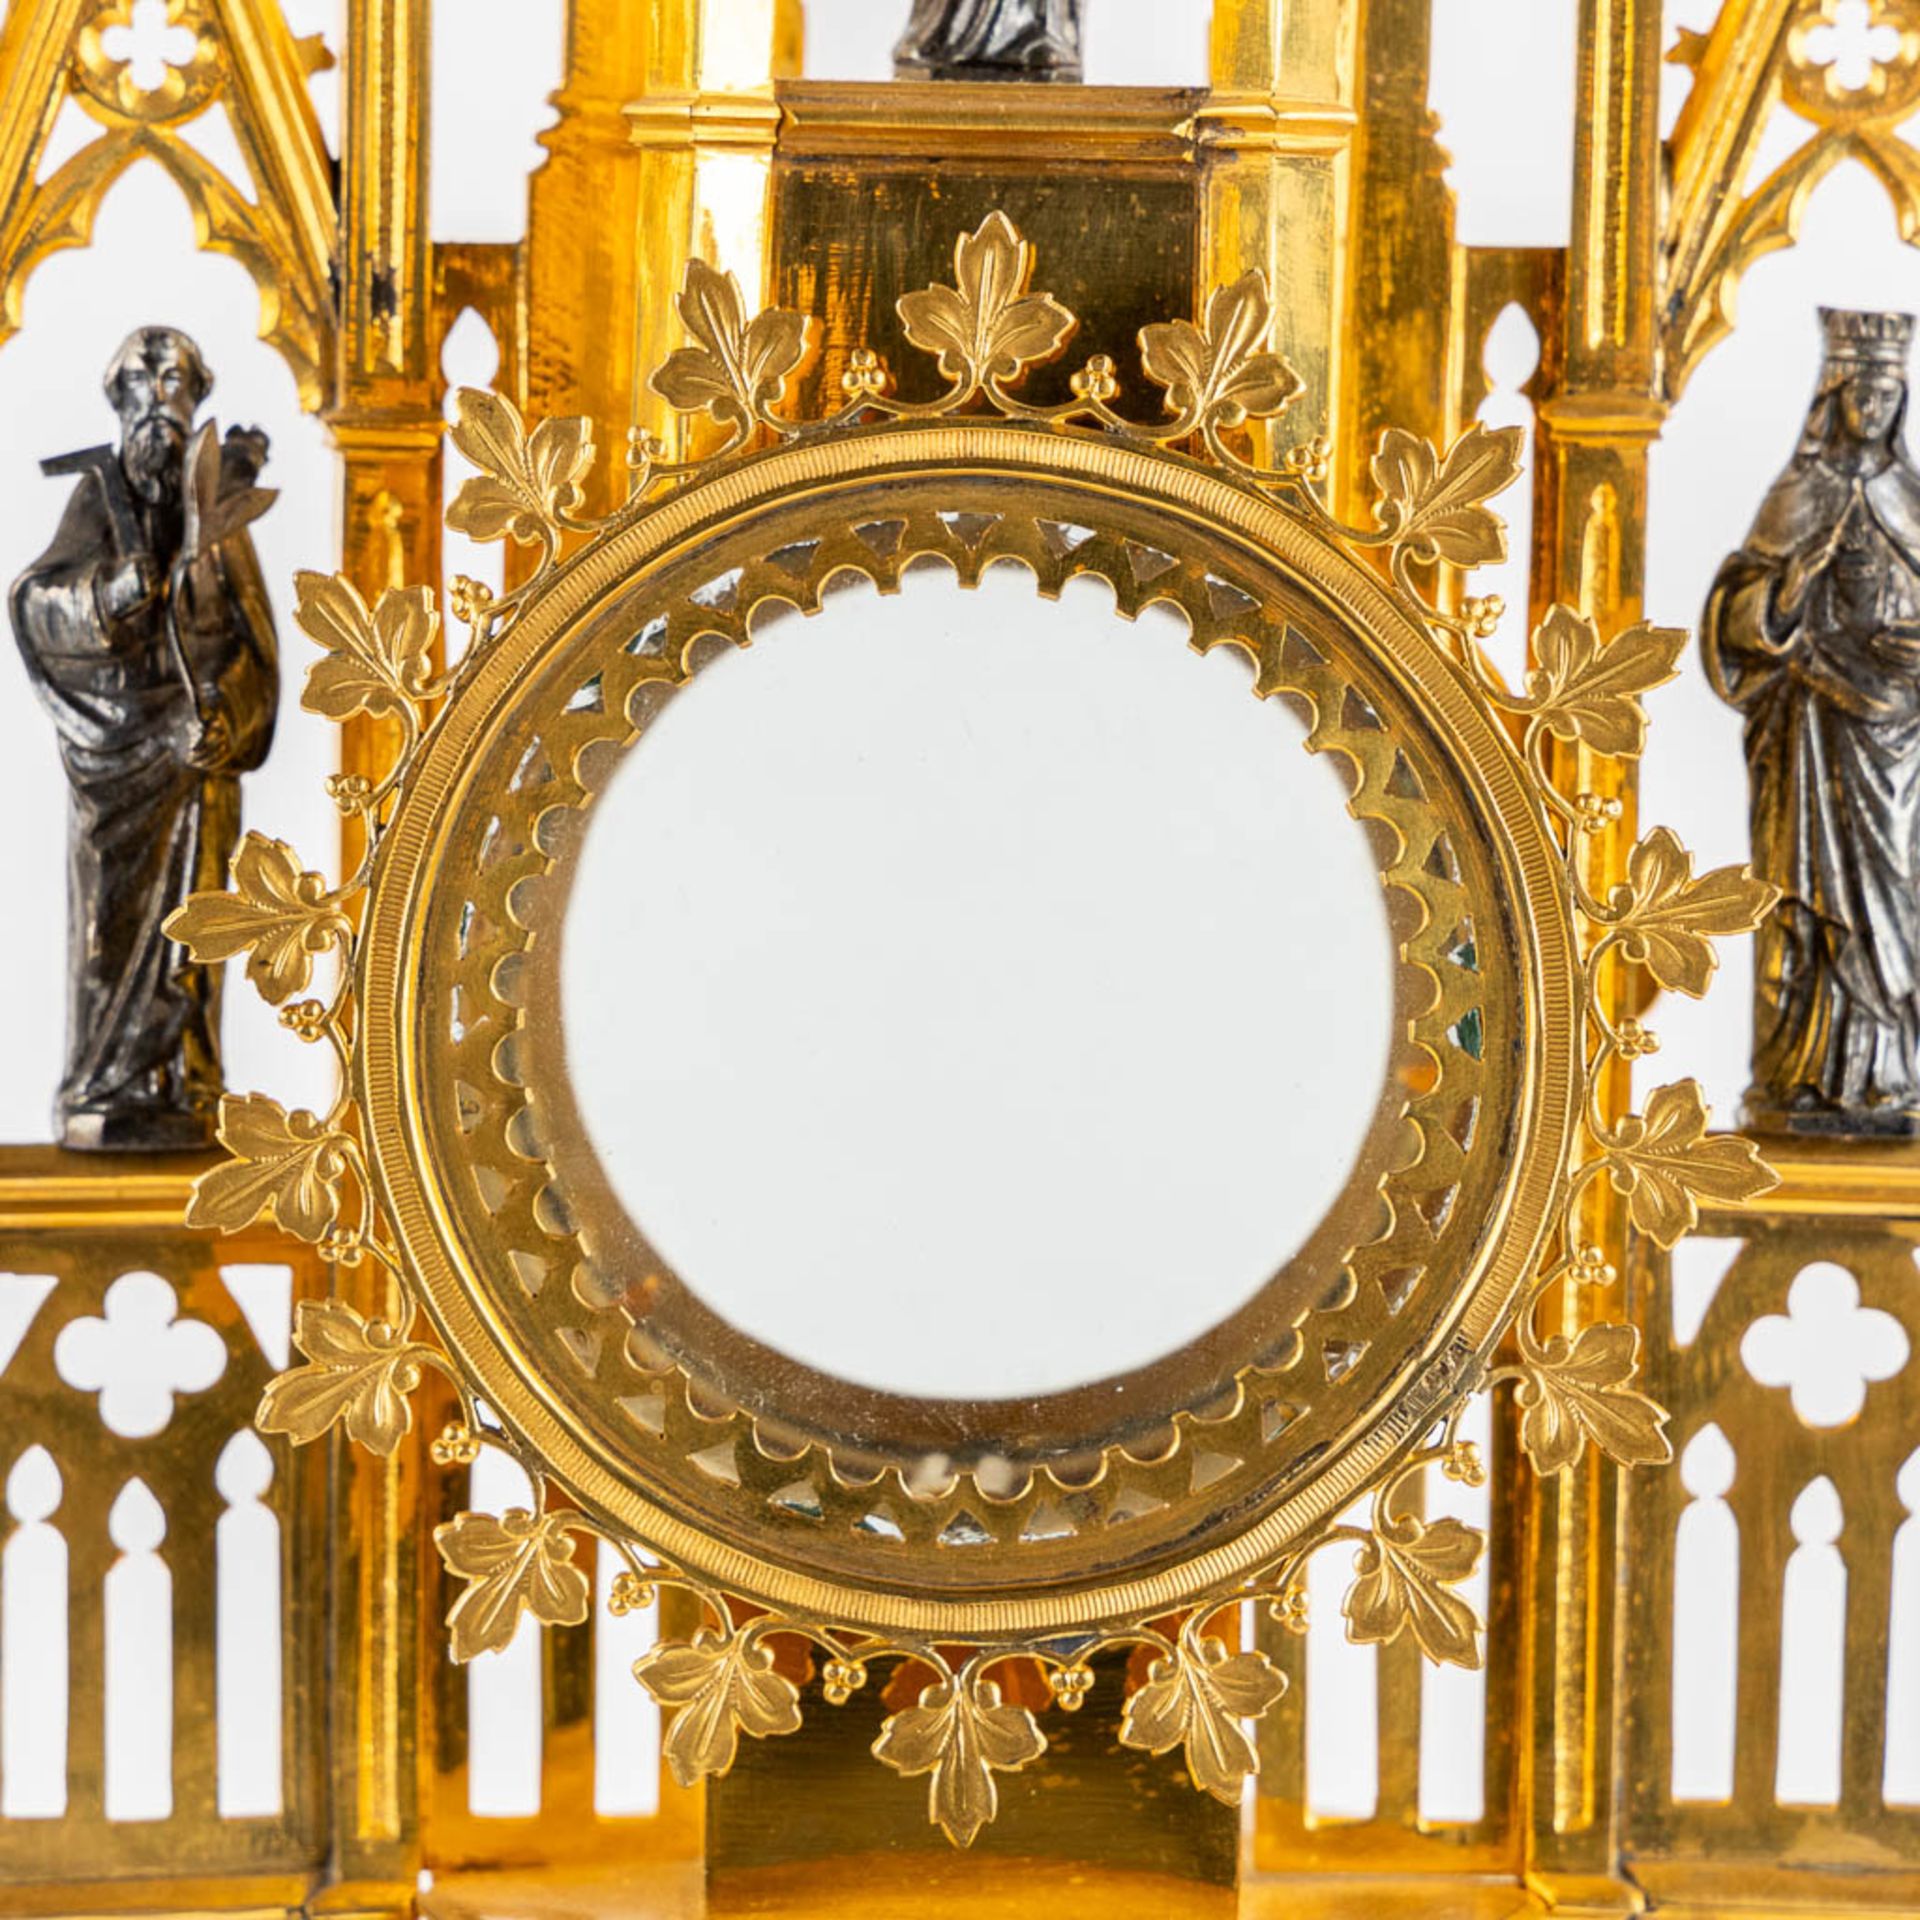 A Tower monstrance, gilt and silver plated brass, Gothic Revival. 19th C. (W:21,5 x H:58 cm) - Bild 17 aus 22